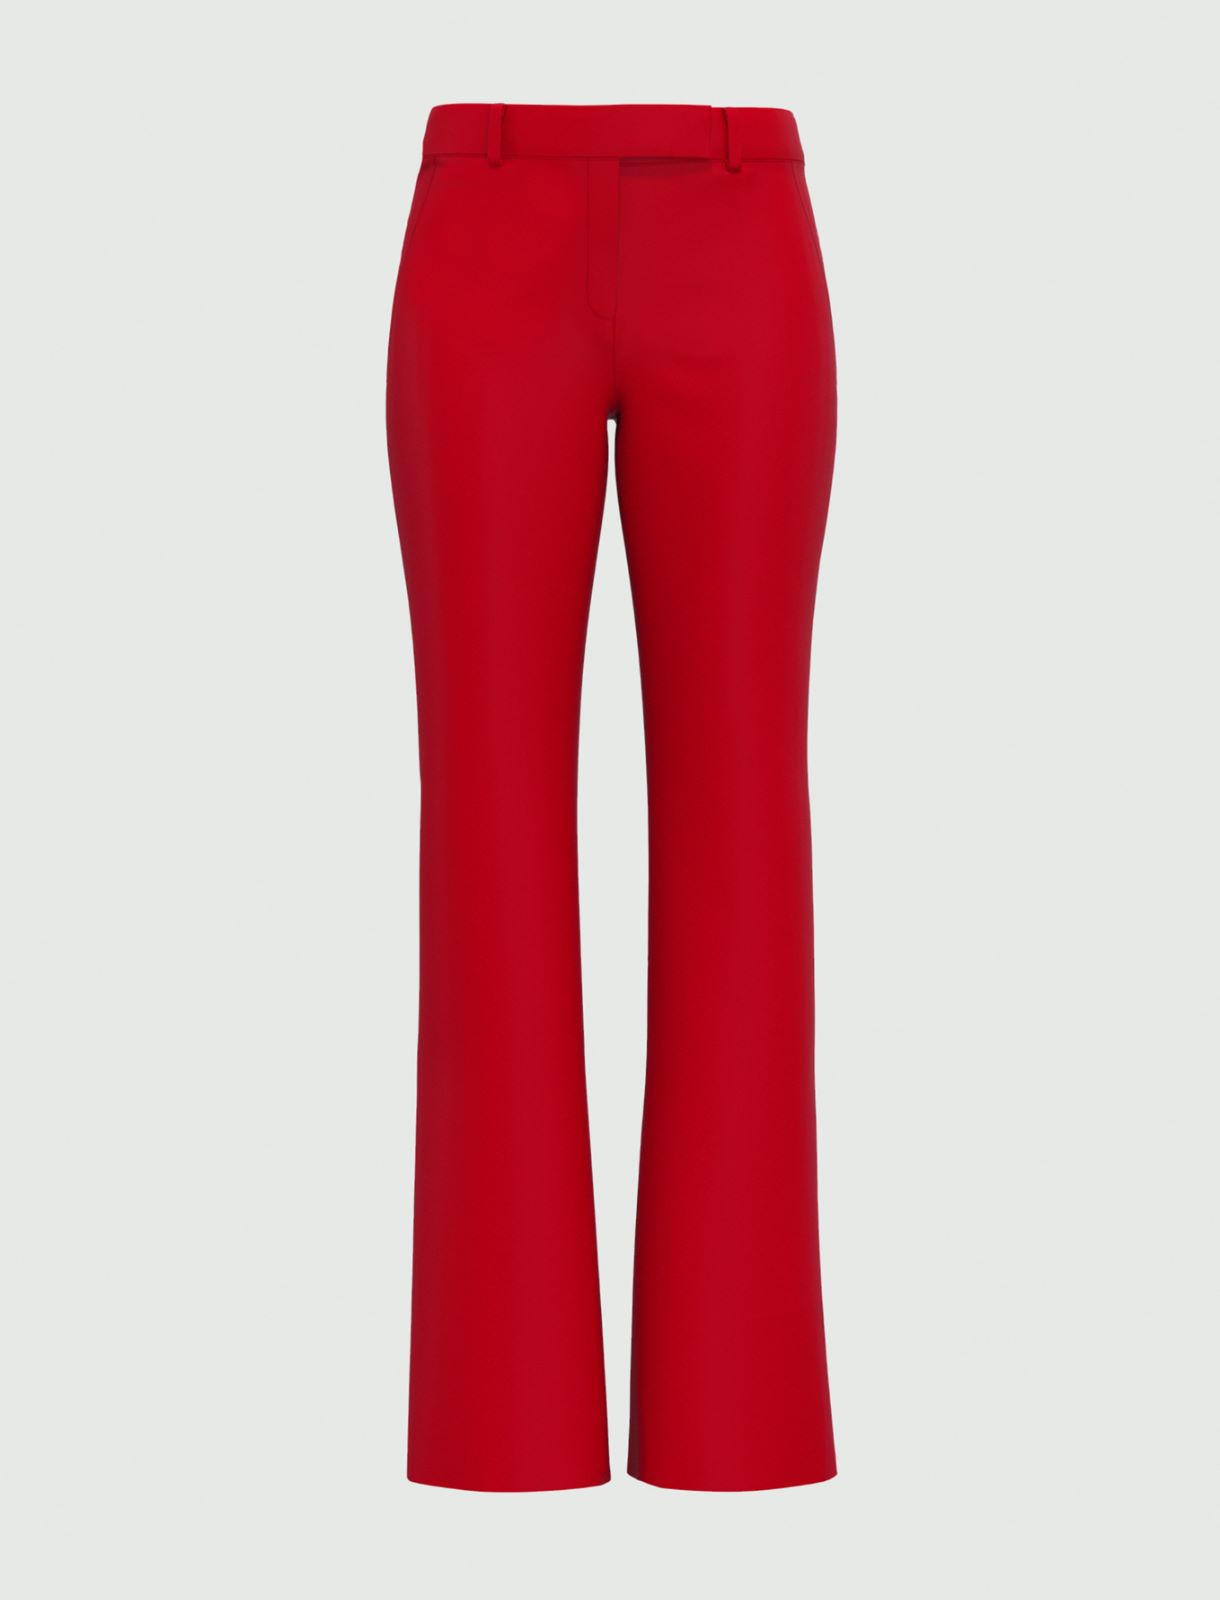 Flared trousers, red Marella